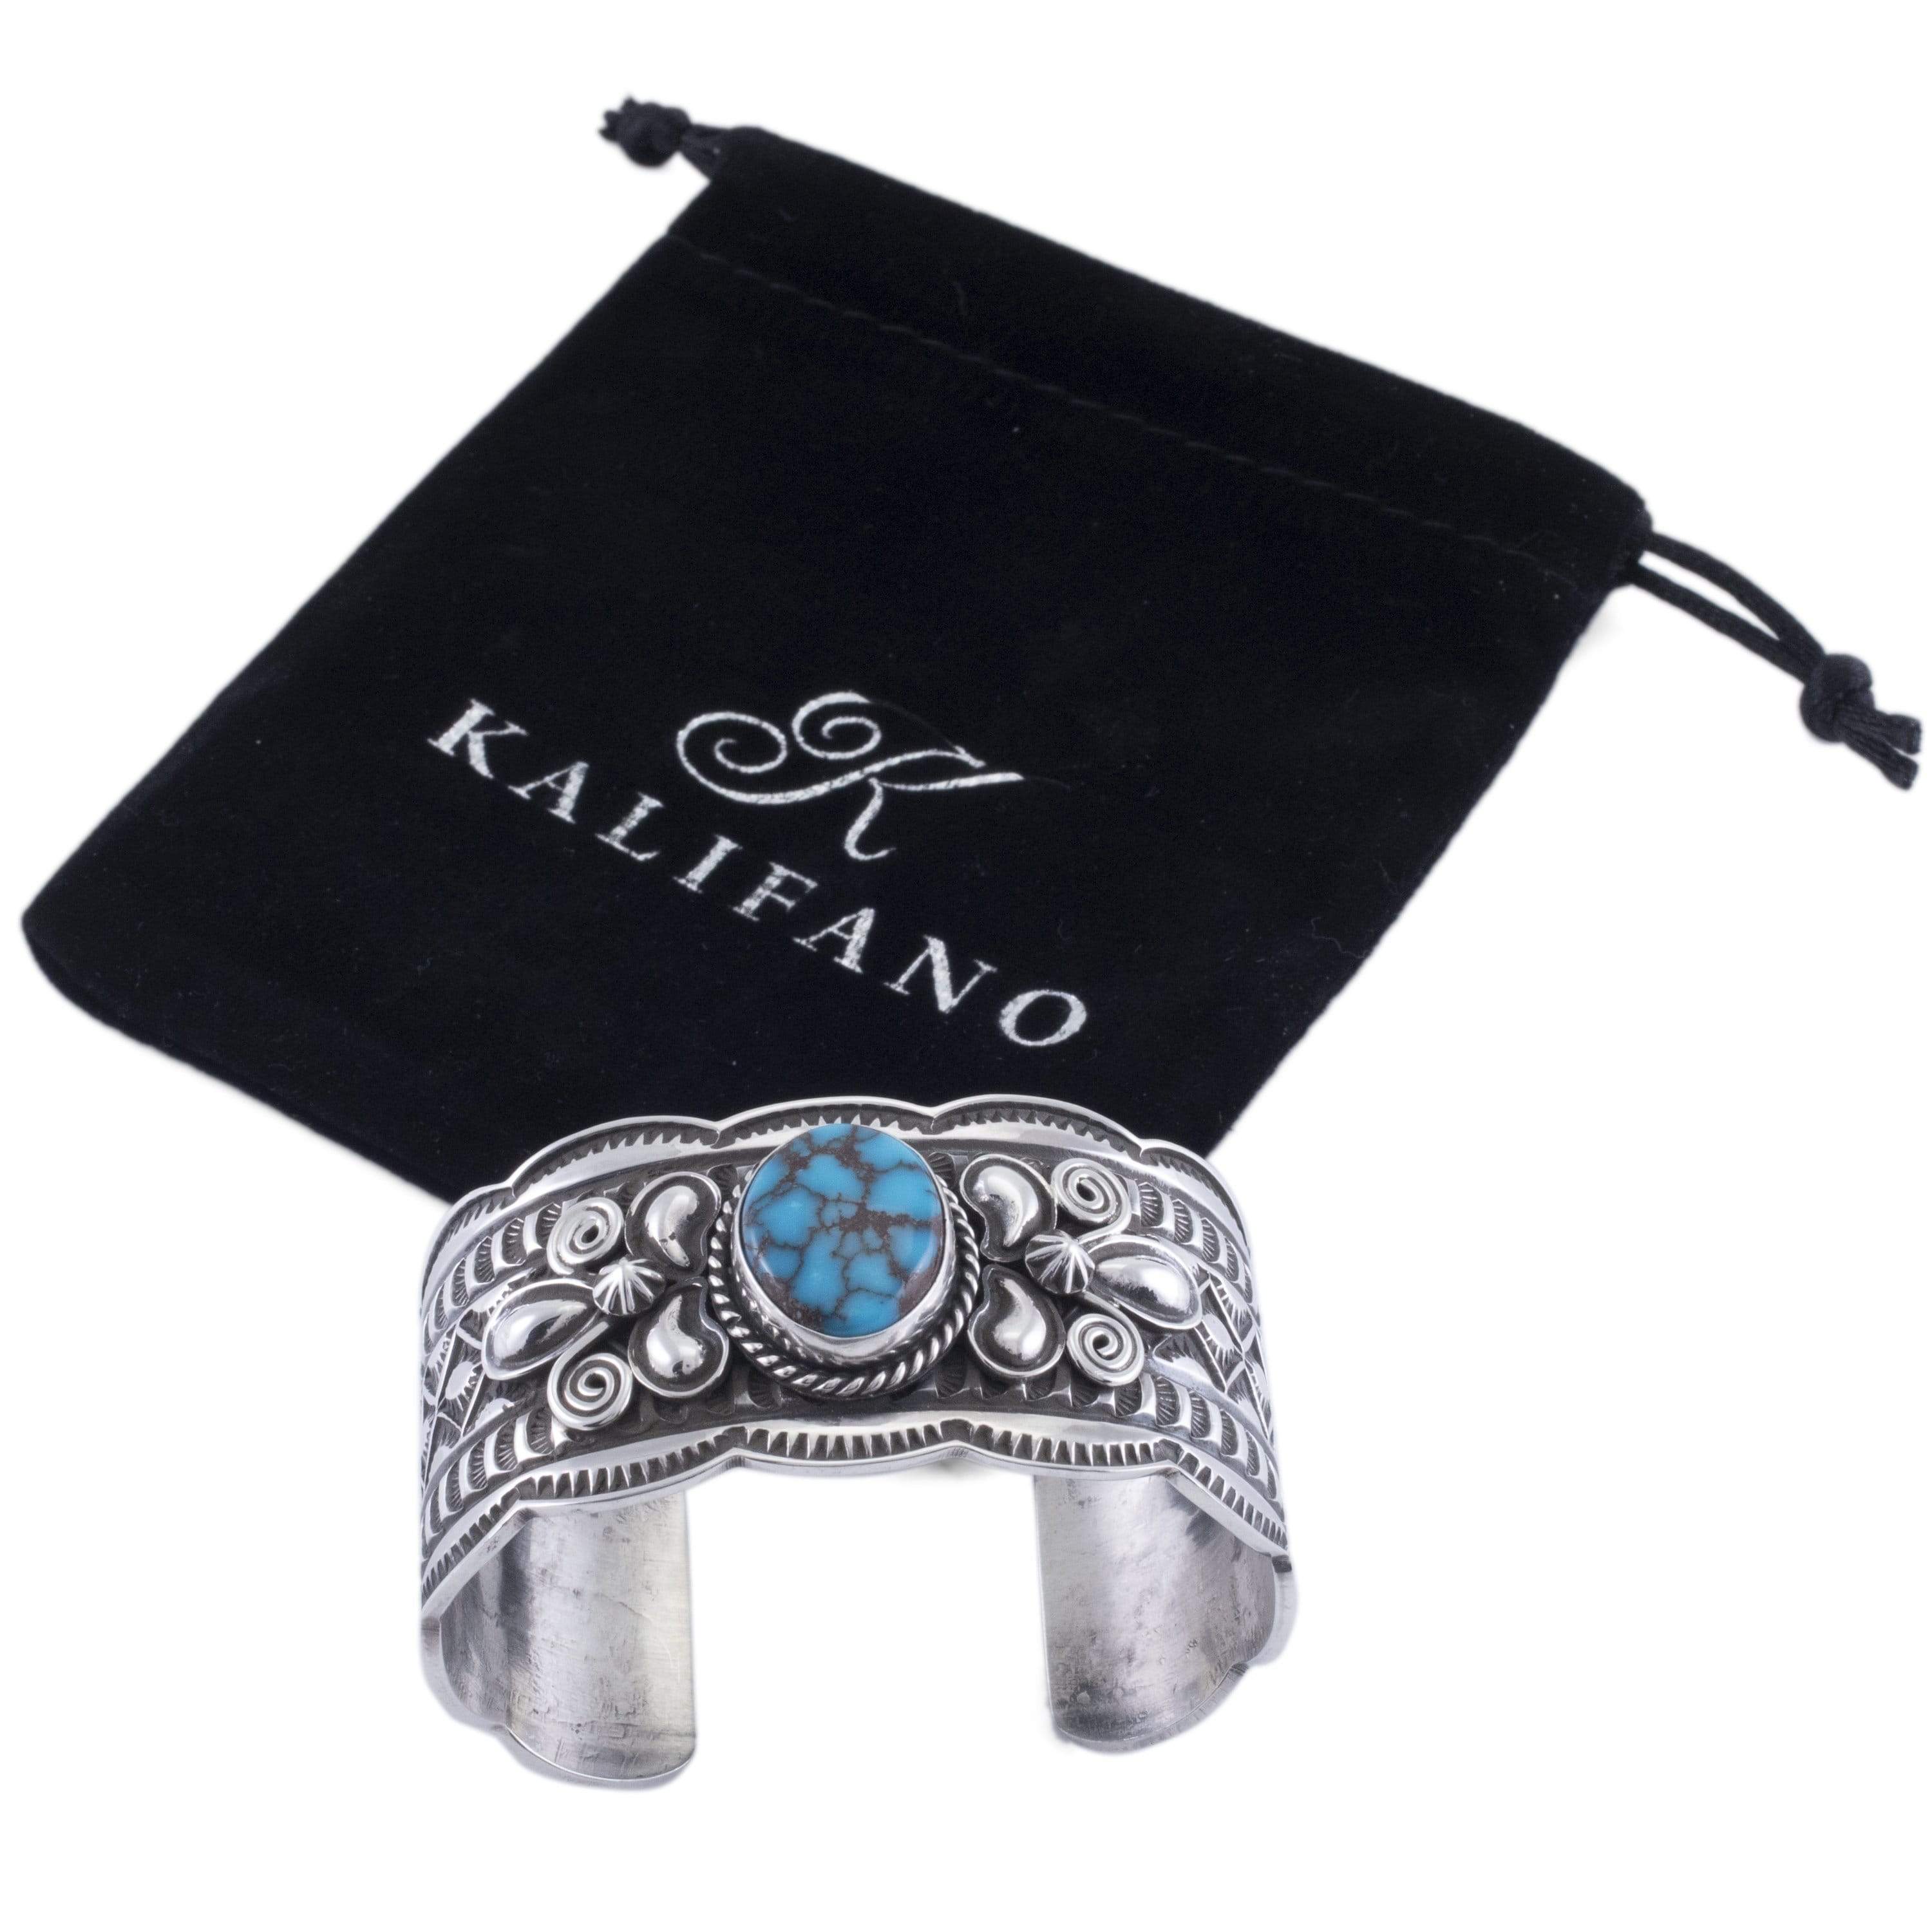 Kalifano Native American Jewelry Andy Cadman Egyptian Turquoise USA Native American Made 925 Sterling Silver Cuff NAB3000.004